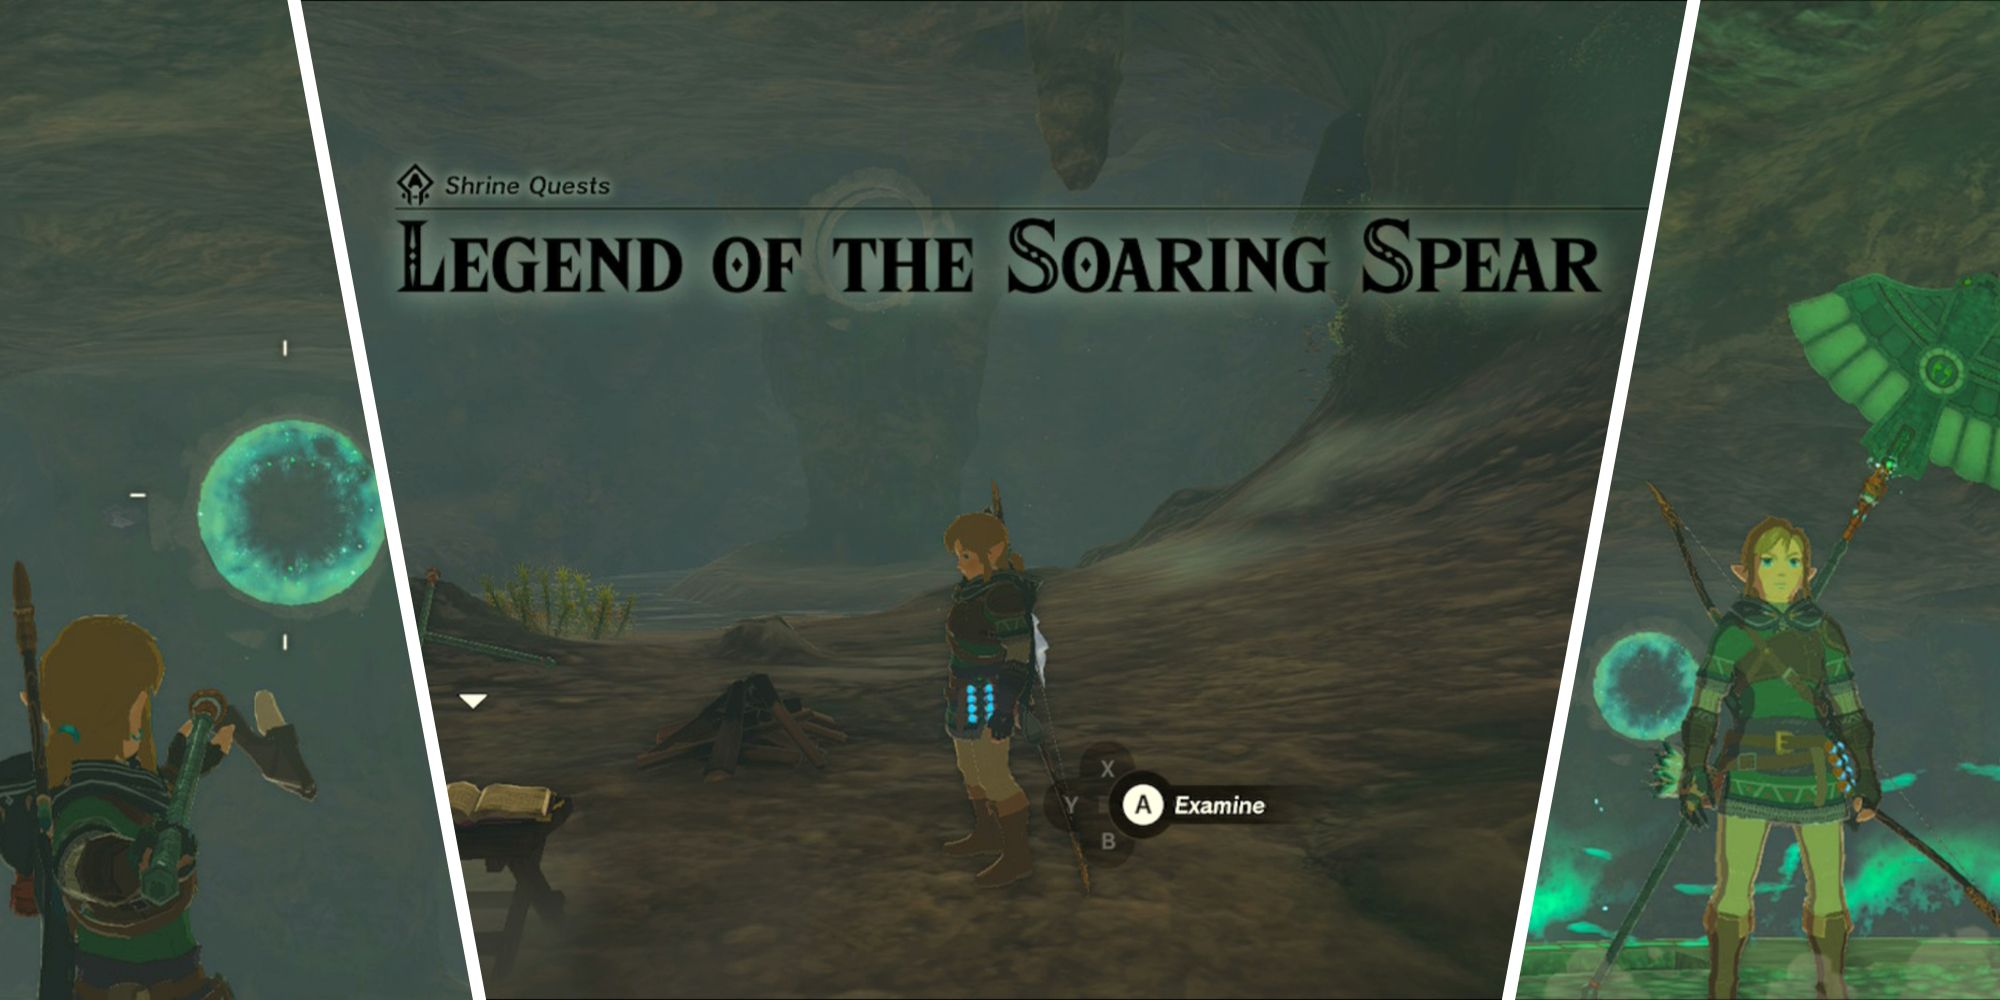 Hundreds of hours in… I found fishing spears : r/botw